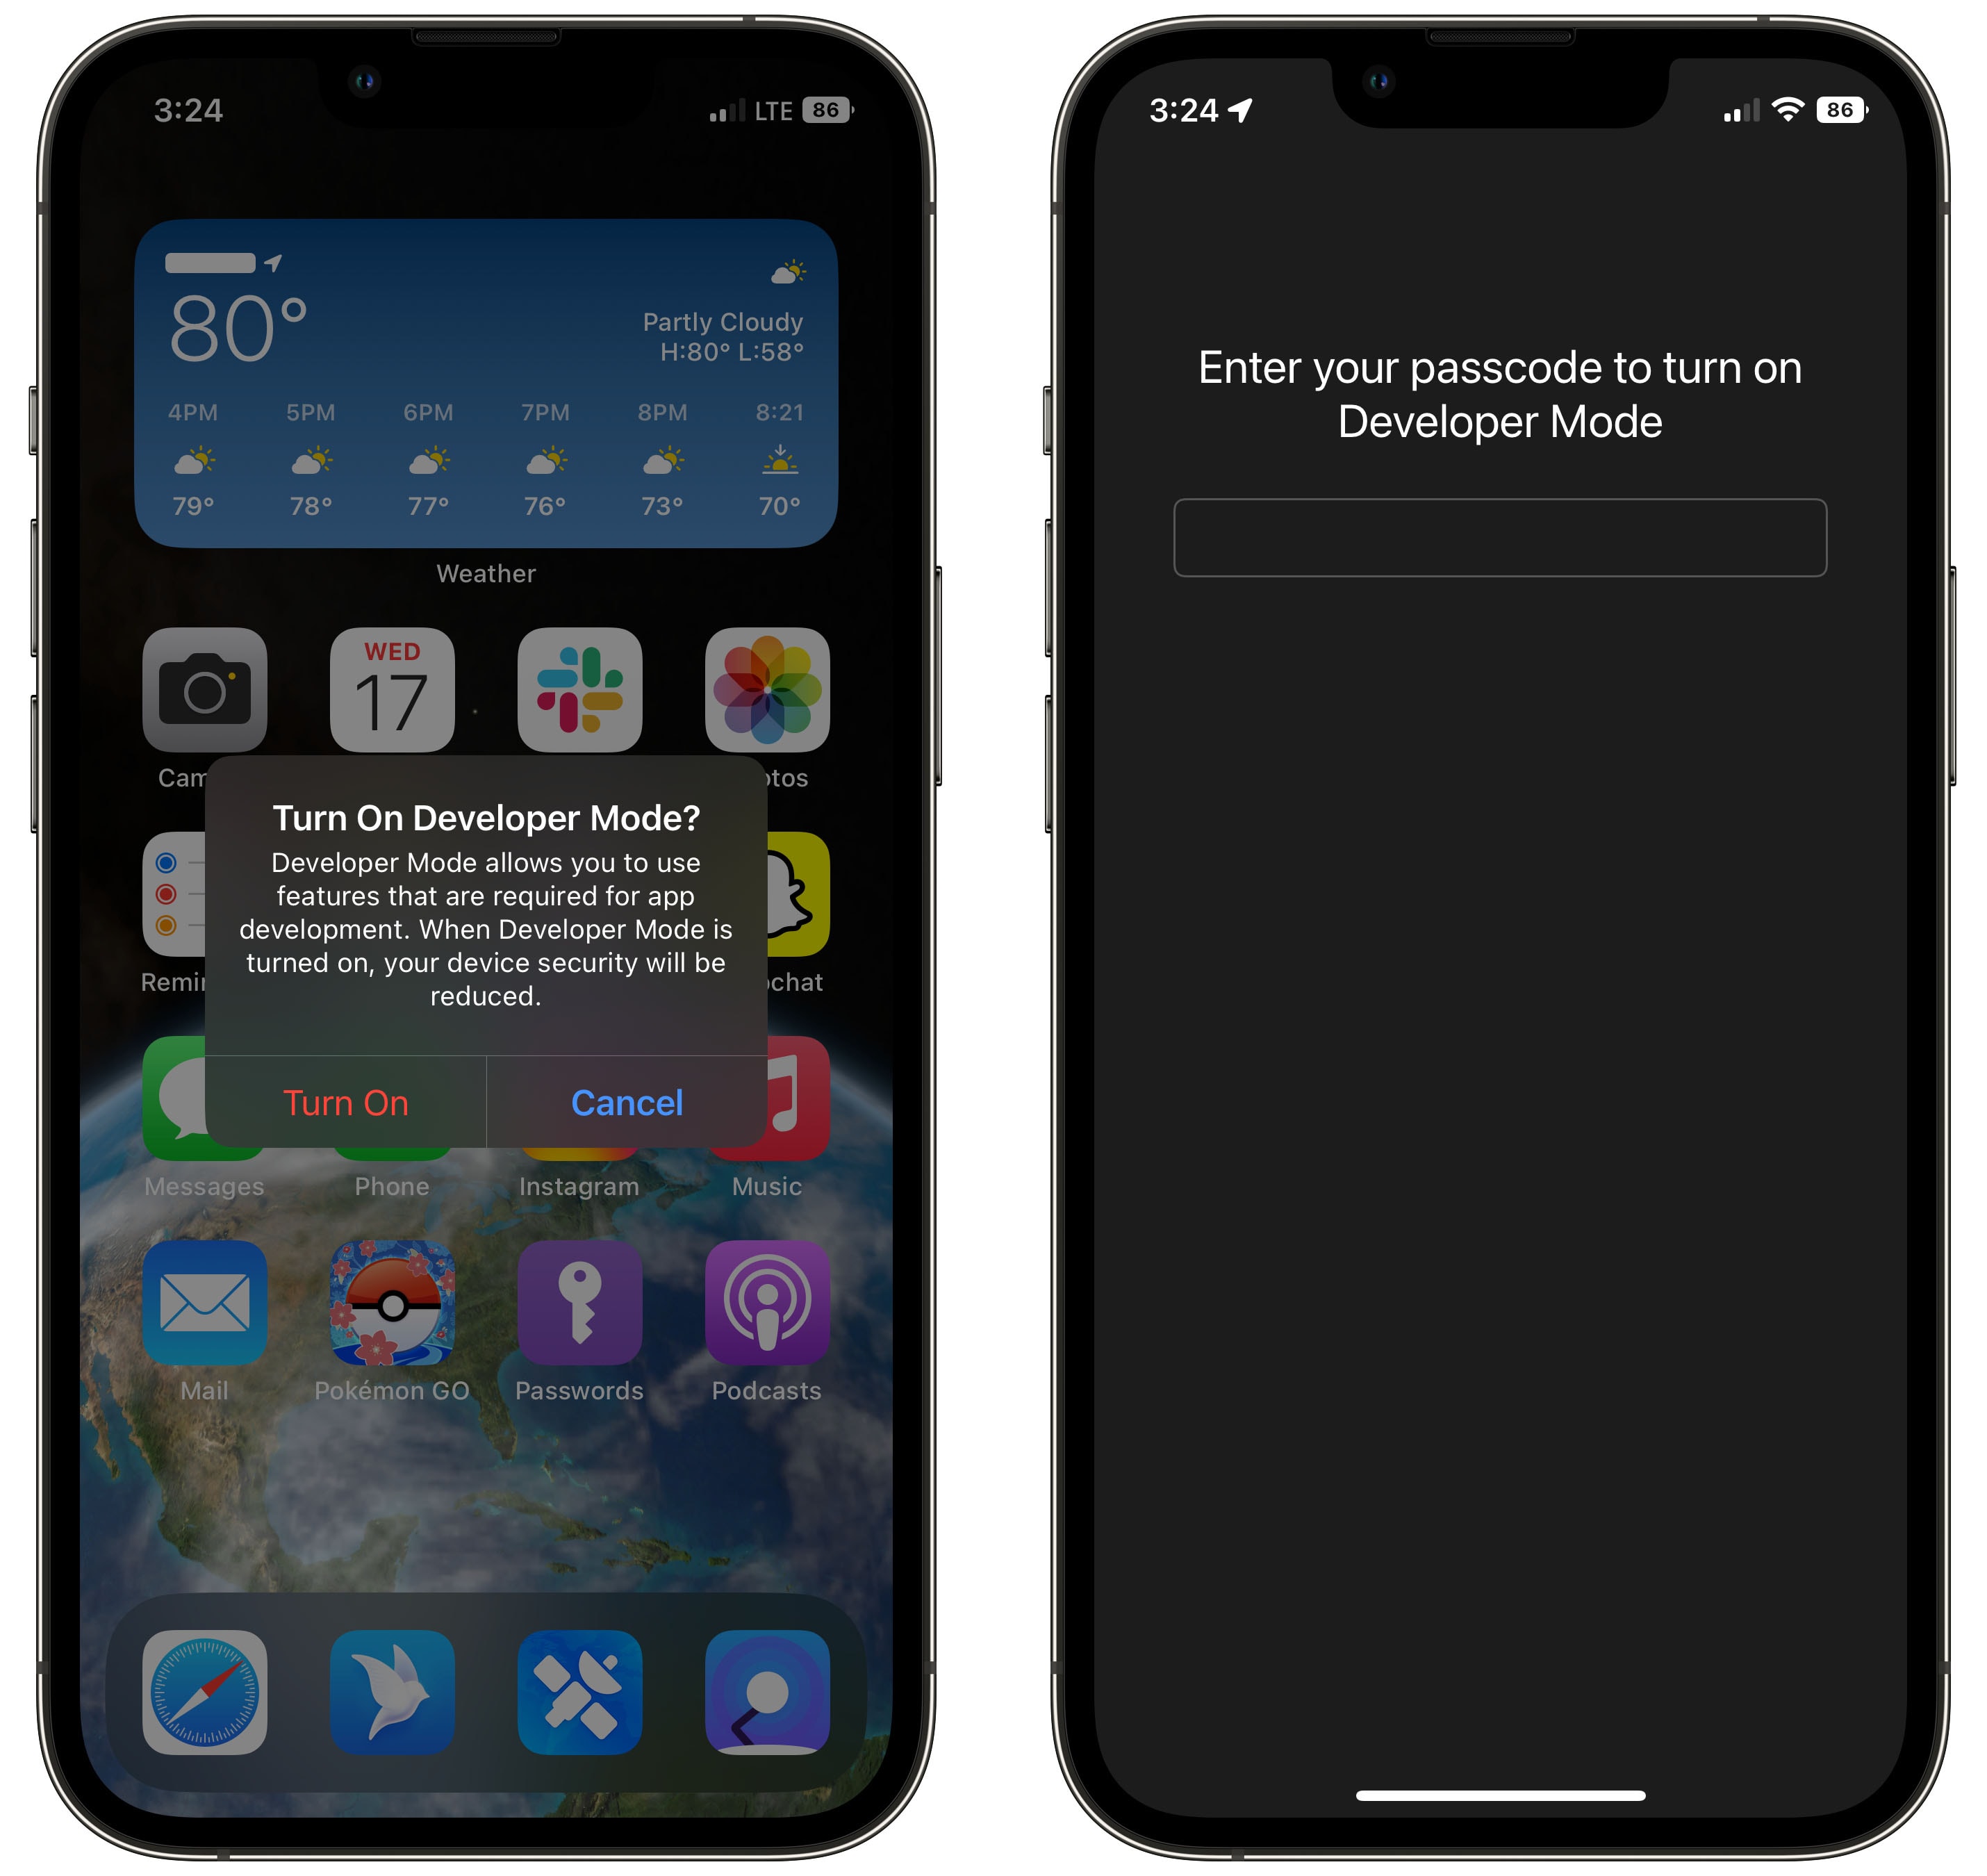 You will be asked once more if you are really very sure you want to enable Developer Mode.